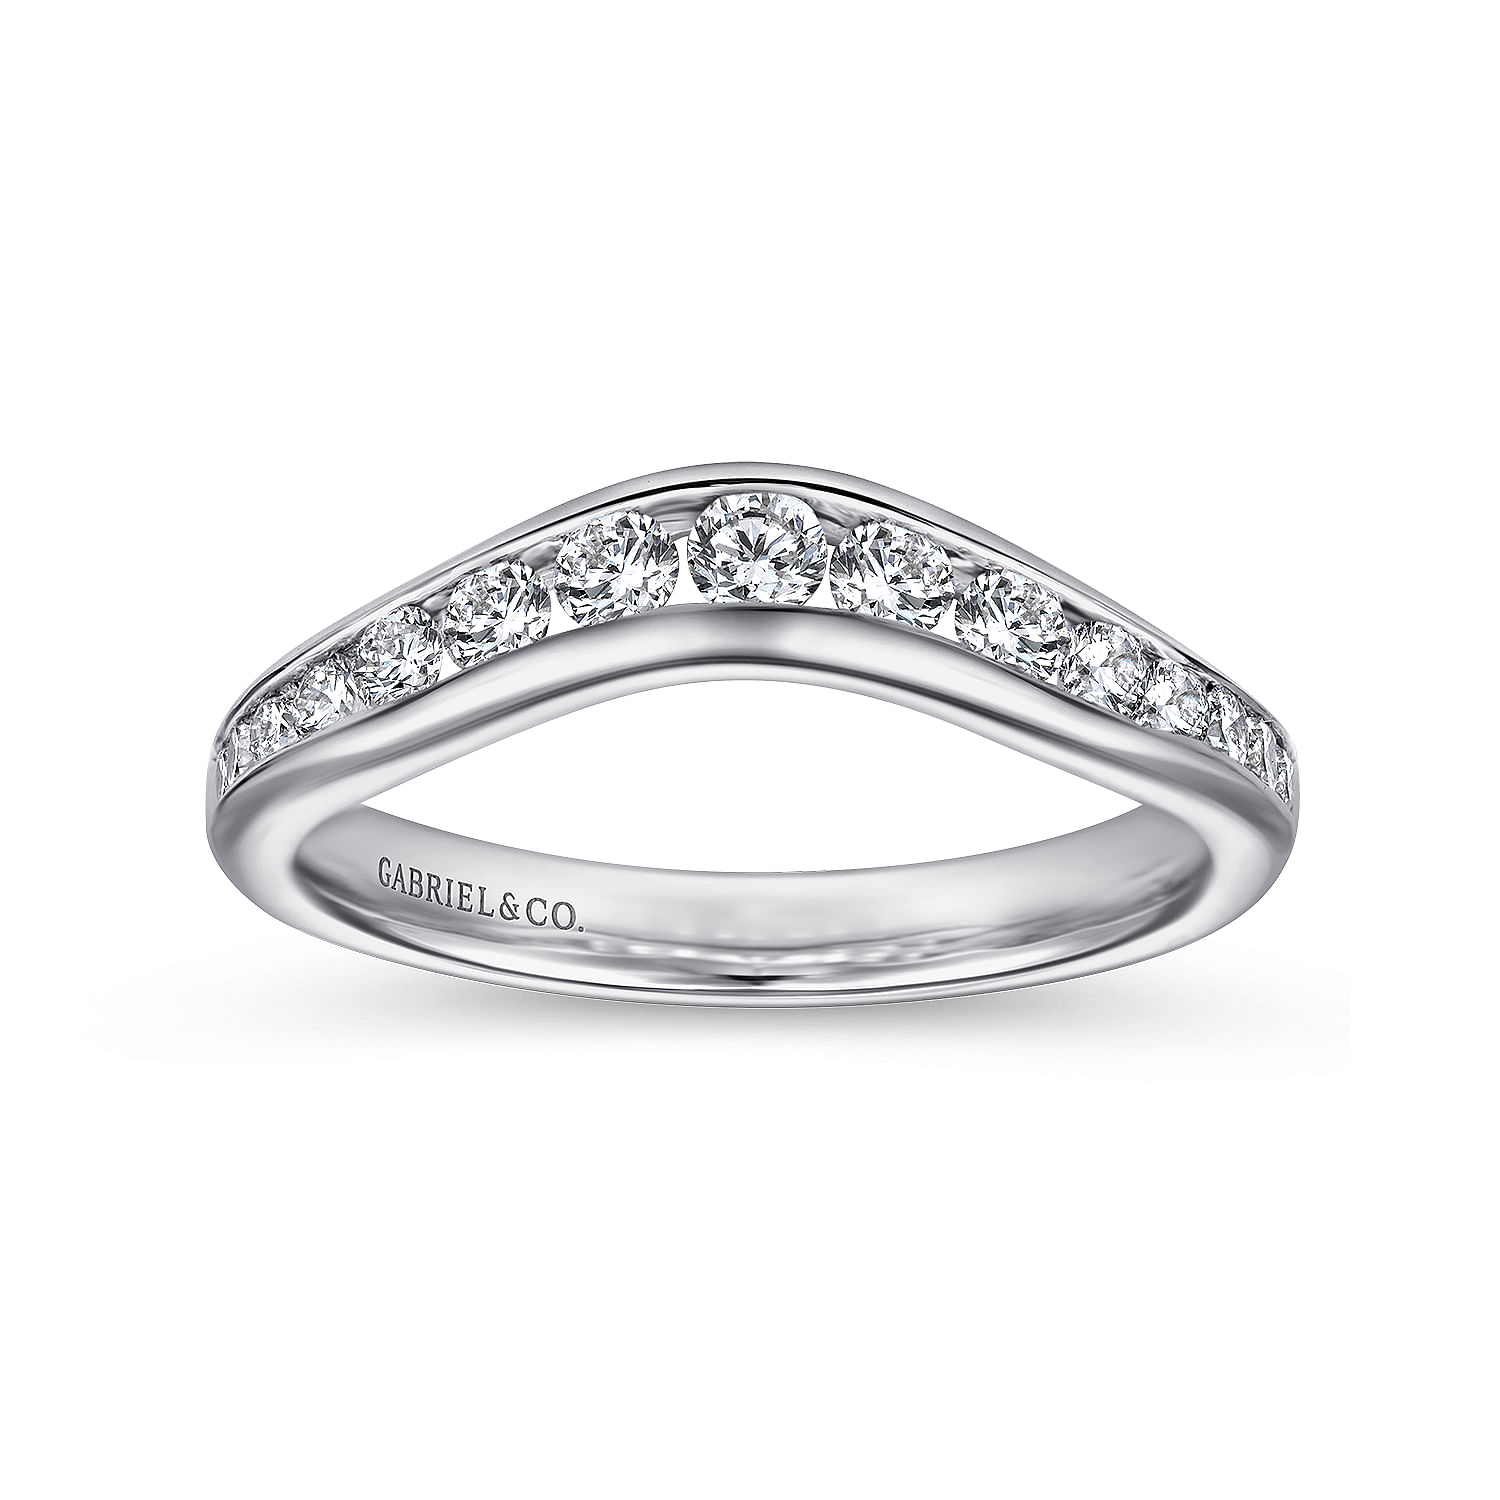 Curved 14K White Gold Channel Set Diamond Wedding Band